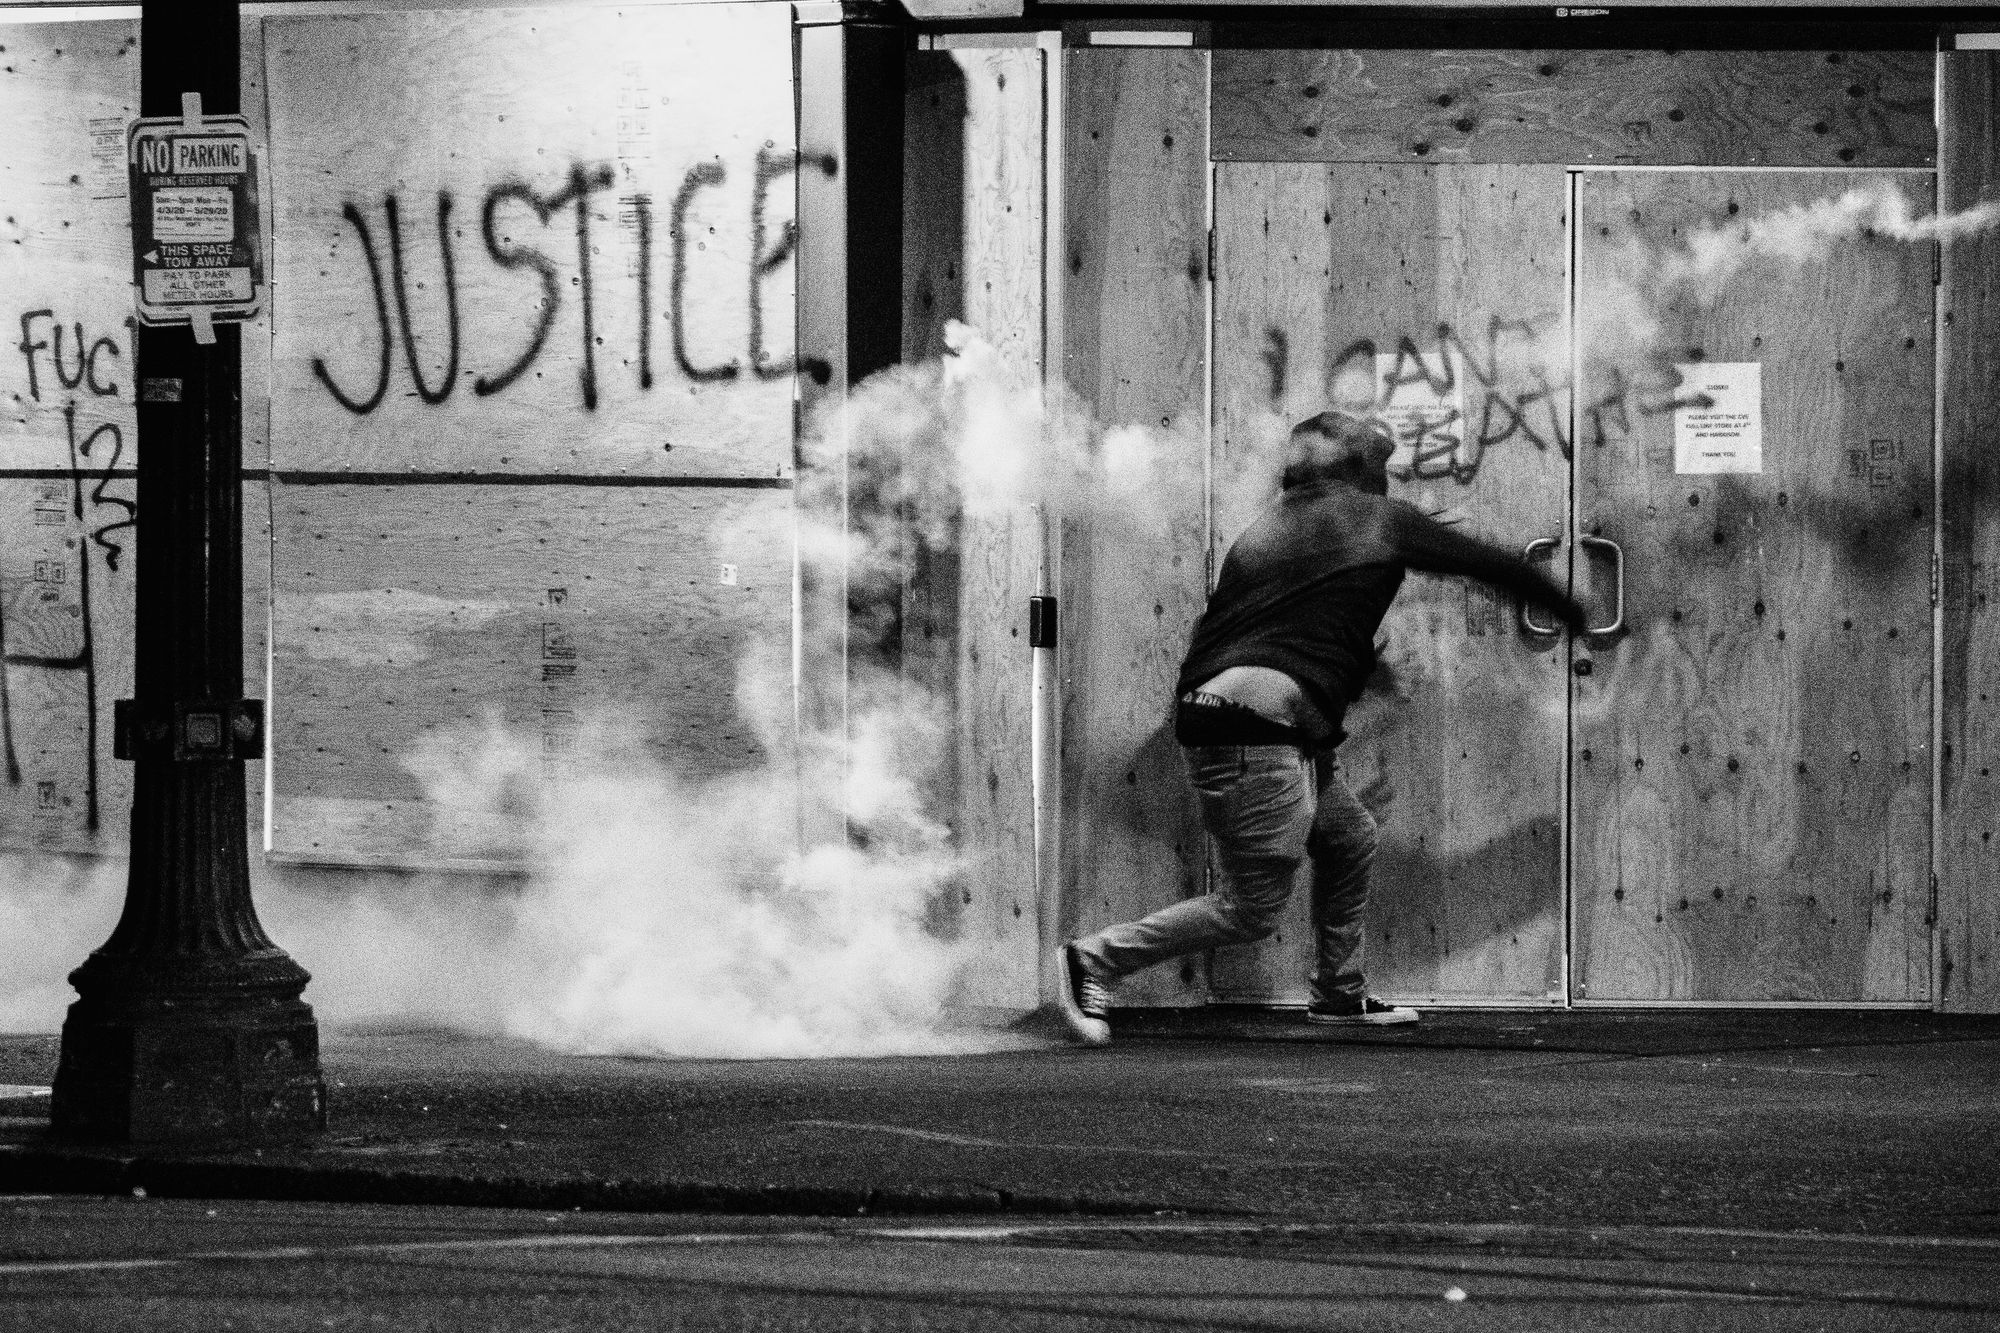 Male protester throwing a tear gas canister back towards the police